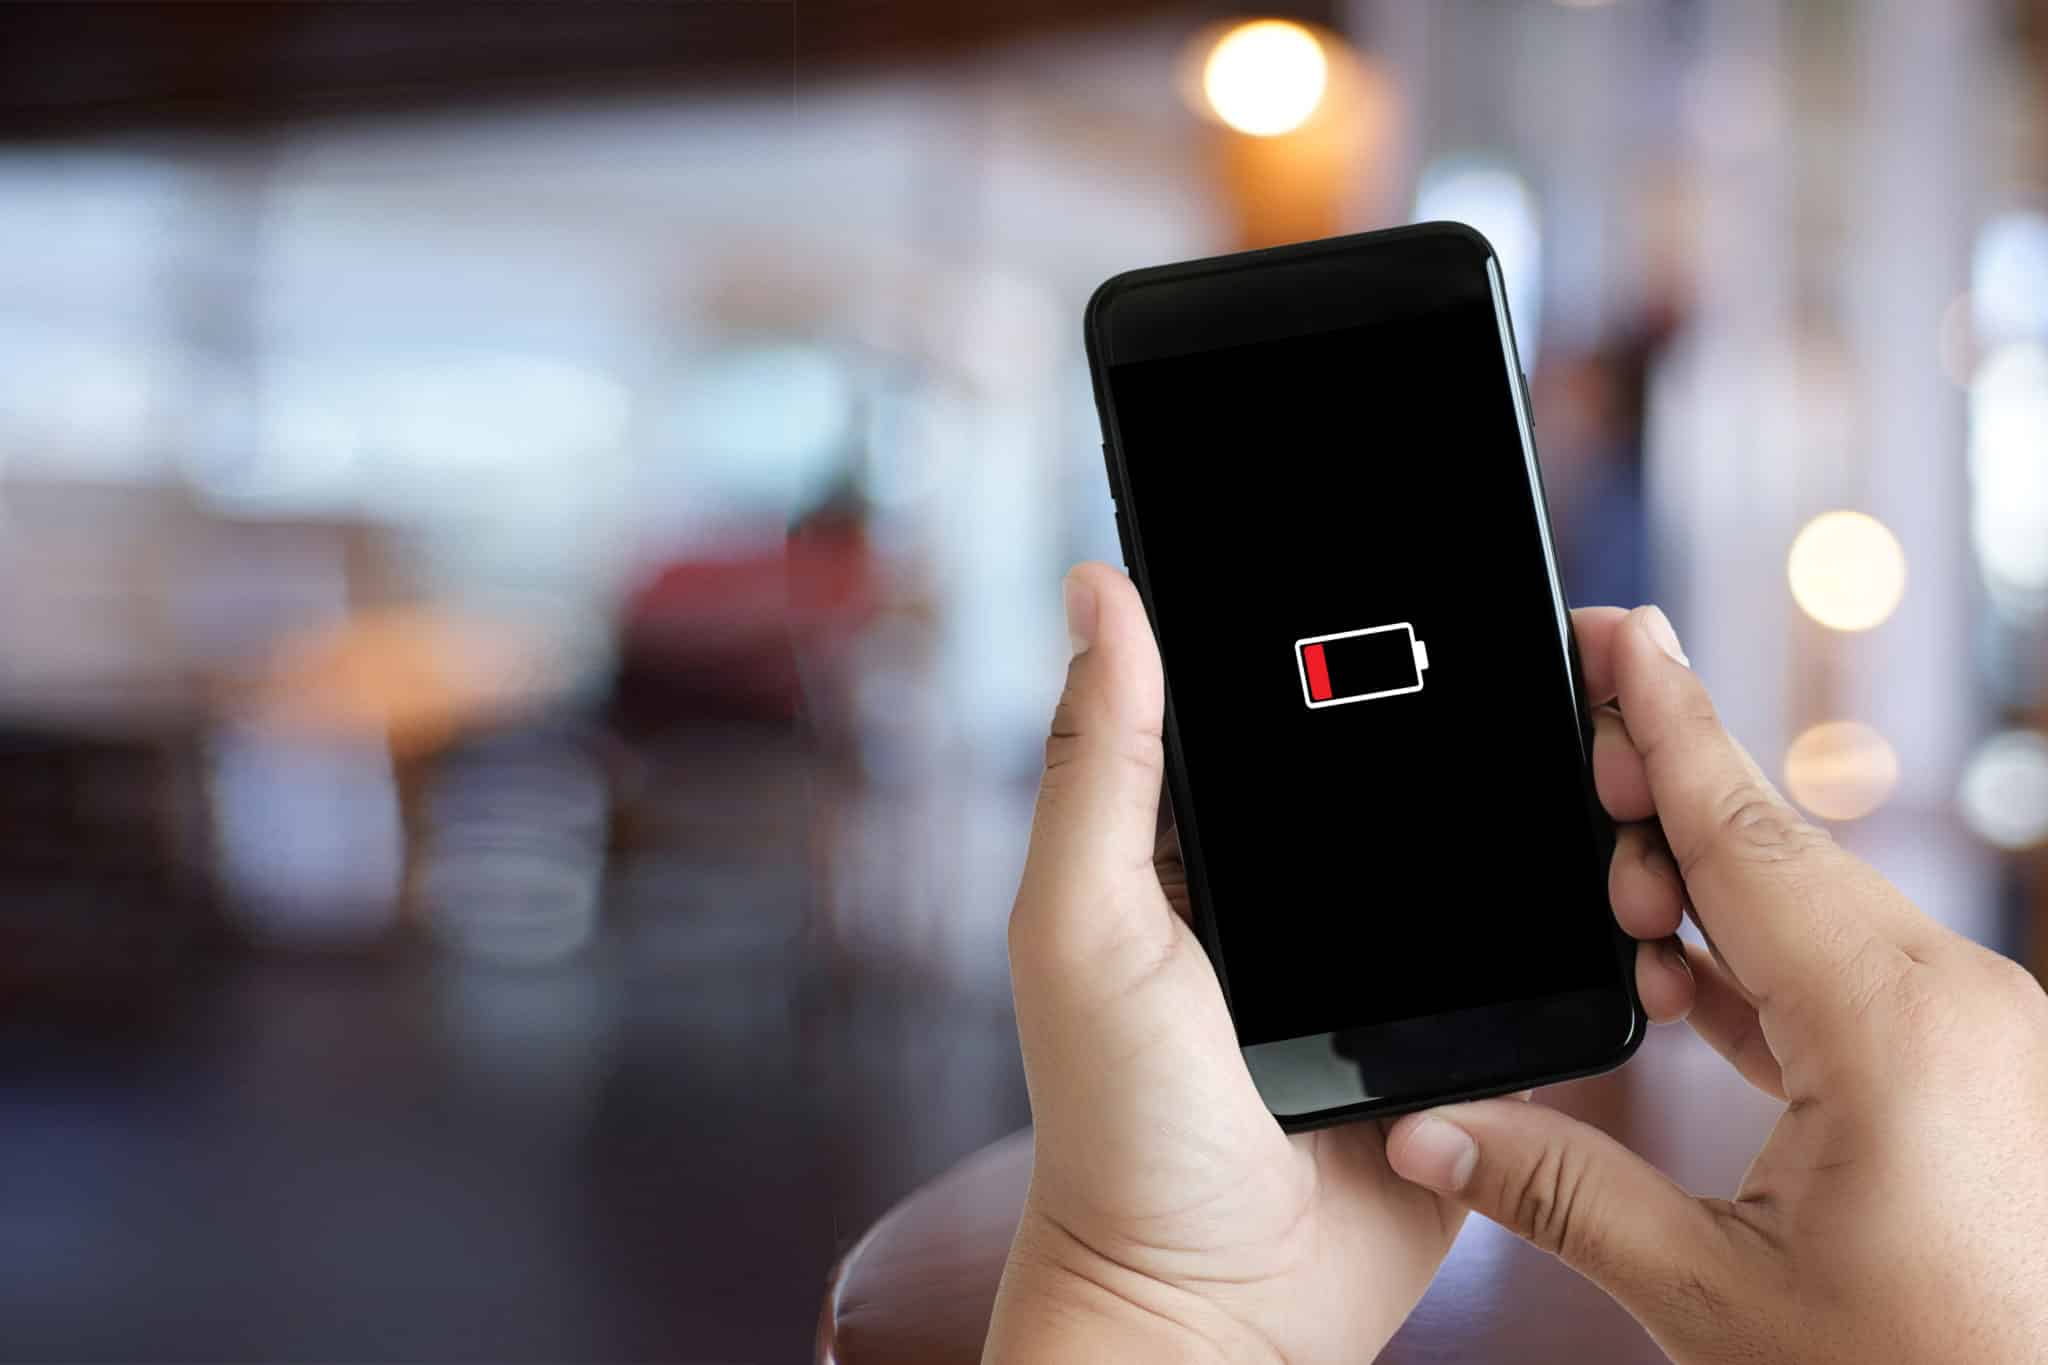 How to Use Power Saver Mode to Help Save Your Phone